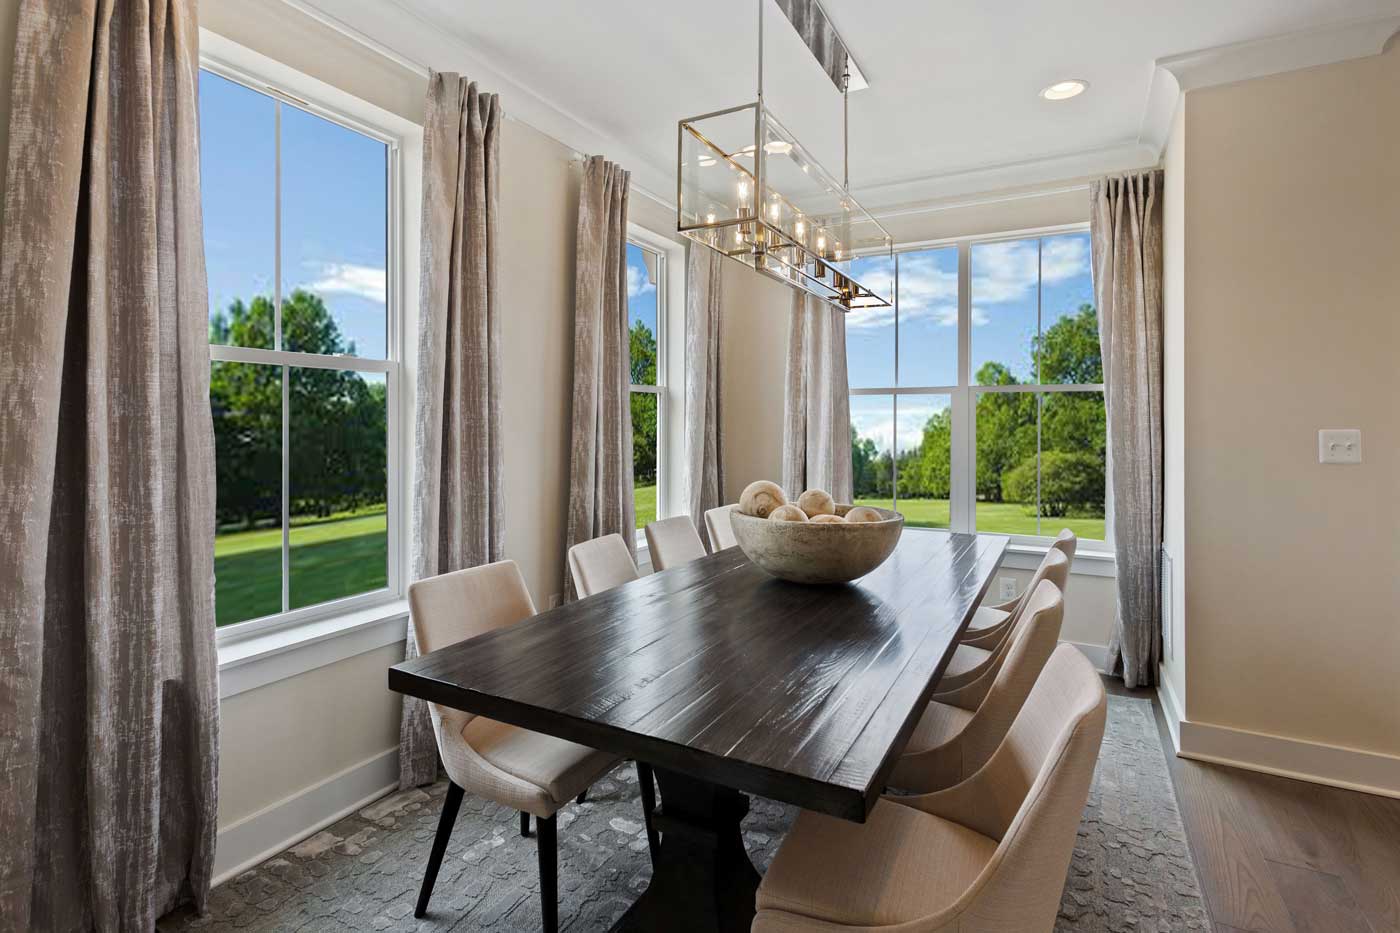 2-Car Garage Townhomes in Fairfax County, VA, The Retreat at Westfields by Craftmark Homes